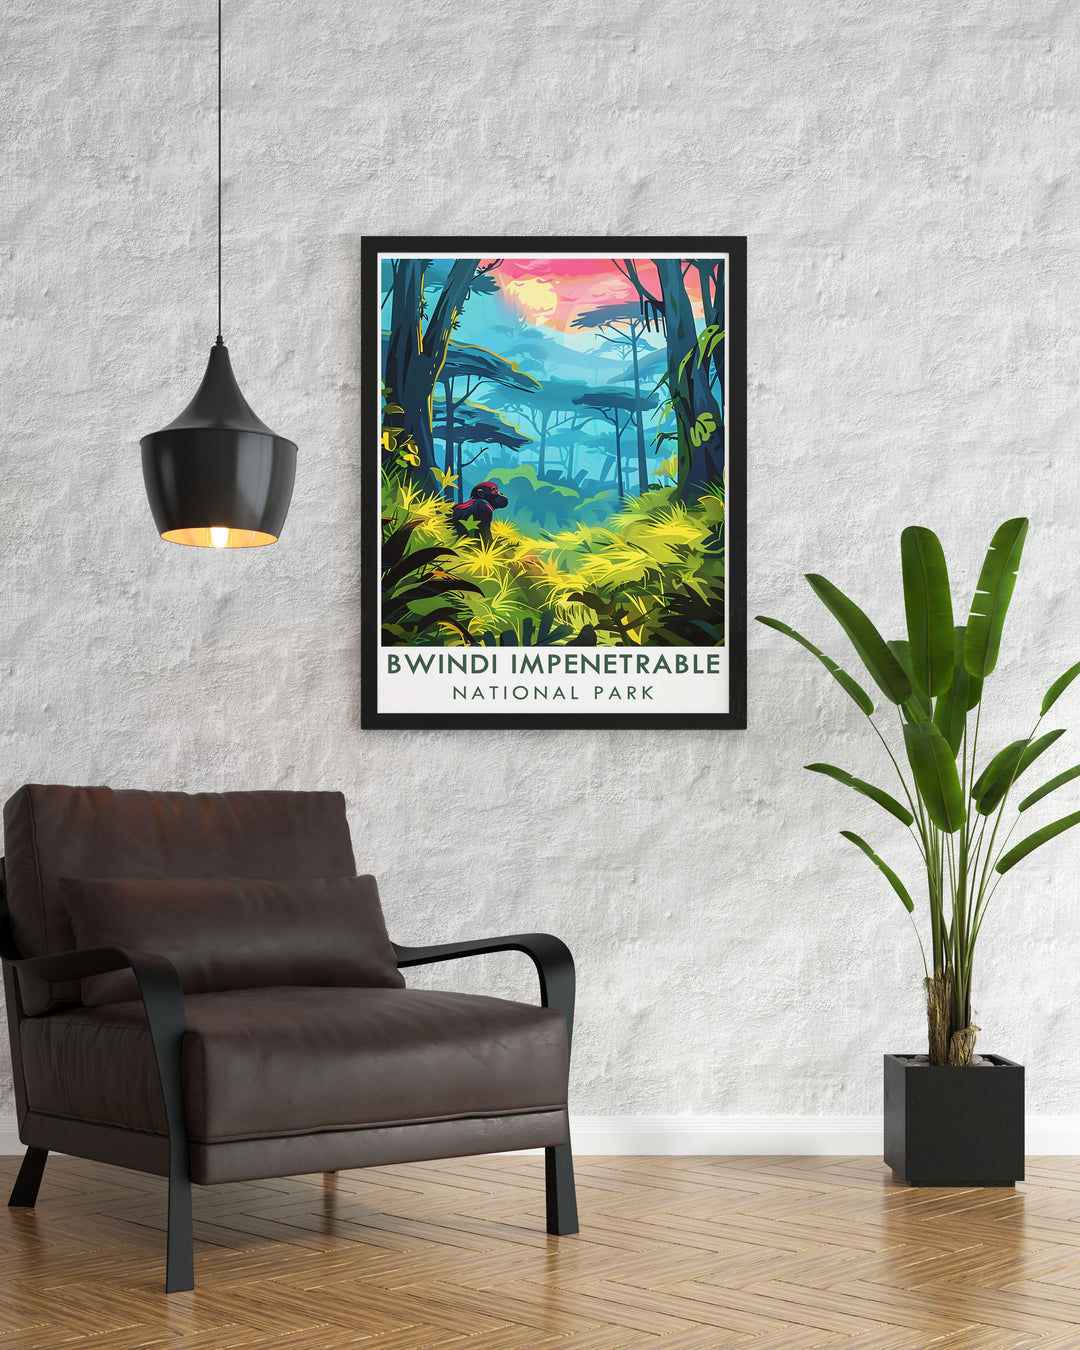 Bwindis lush forest and the iconic mountain gorillas are beautifully captured in this art print, making it a versatile piece for any home decor.